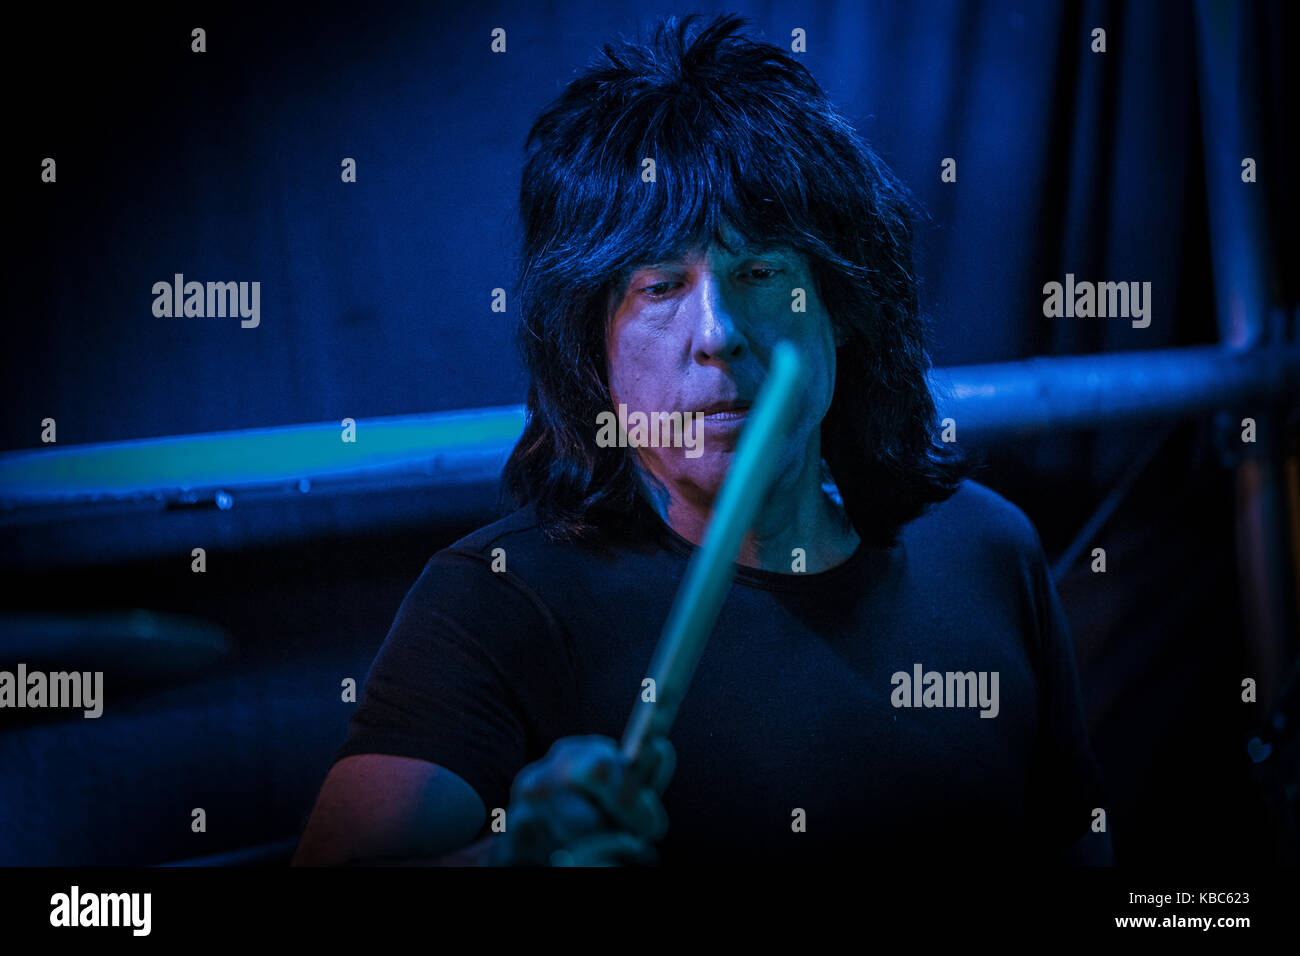 The American hard rock musician and drummer Marky Ramone performs a live concert with his band Blitzkrieg at Hulen in Bergen. Marky Ramone is best known for being the drummer of the legendary punk rock band The Ramones. Norway, 17/04 2015. Stock Photo